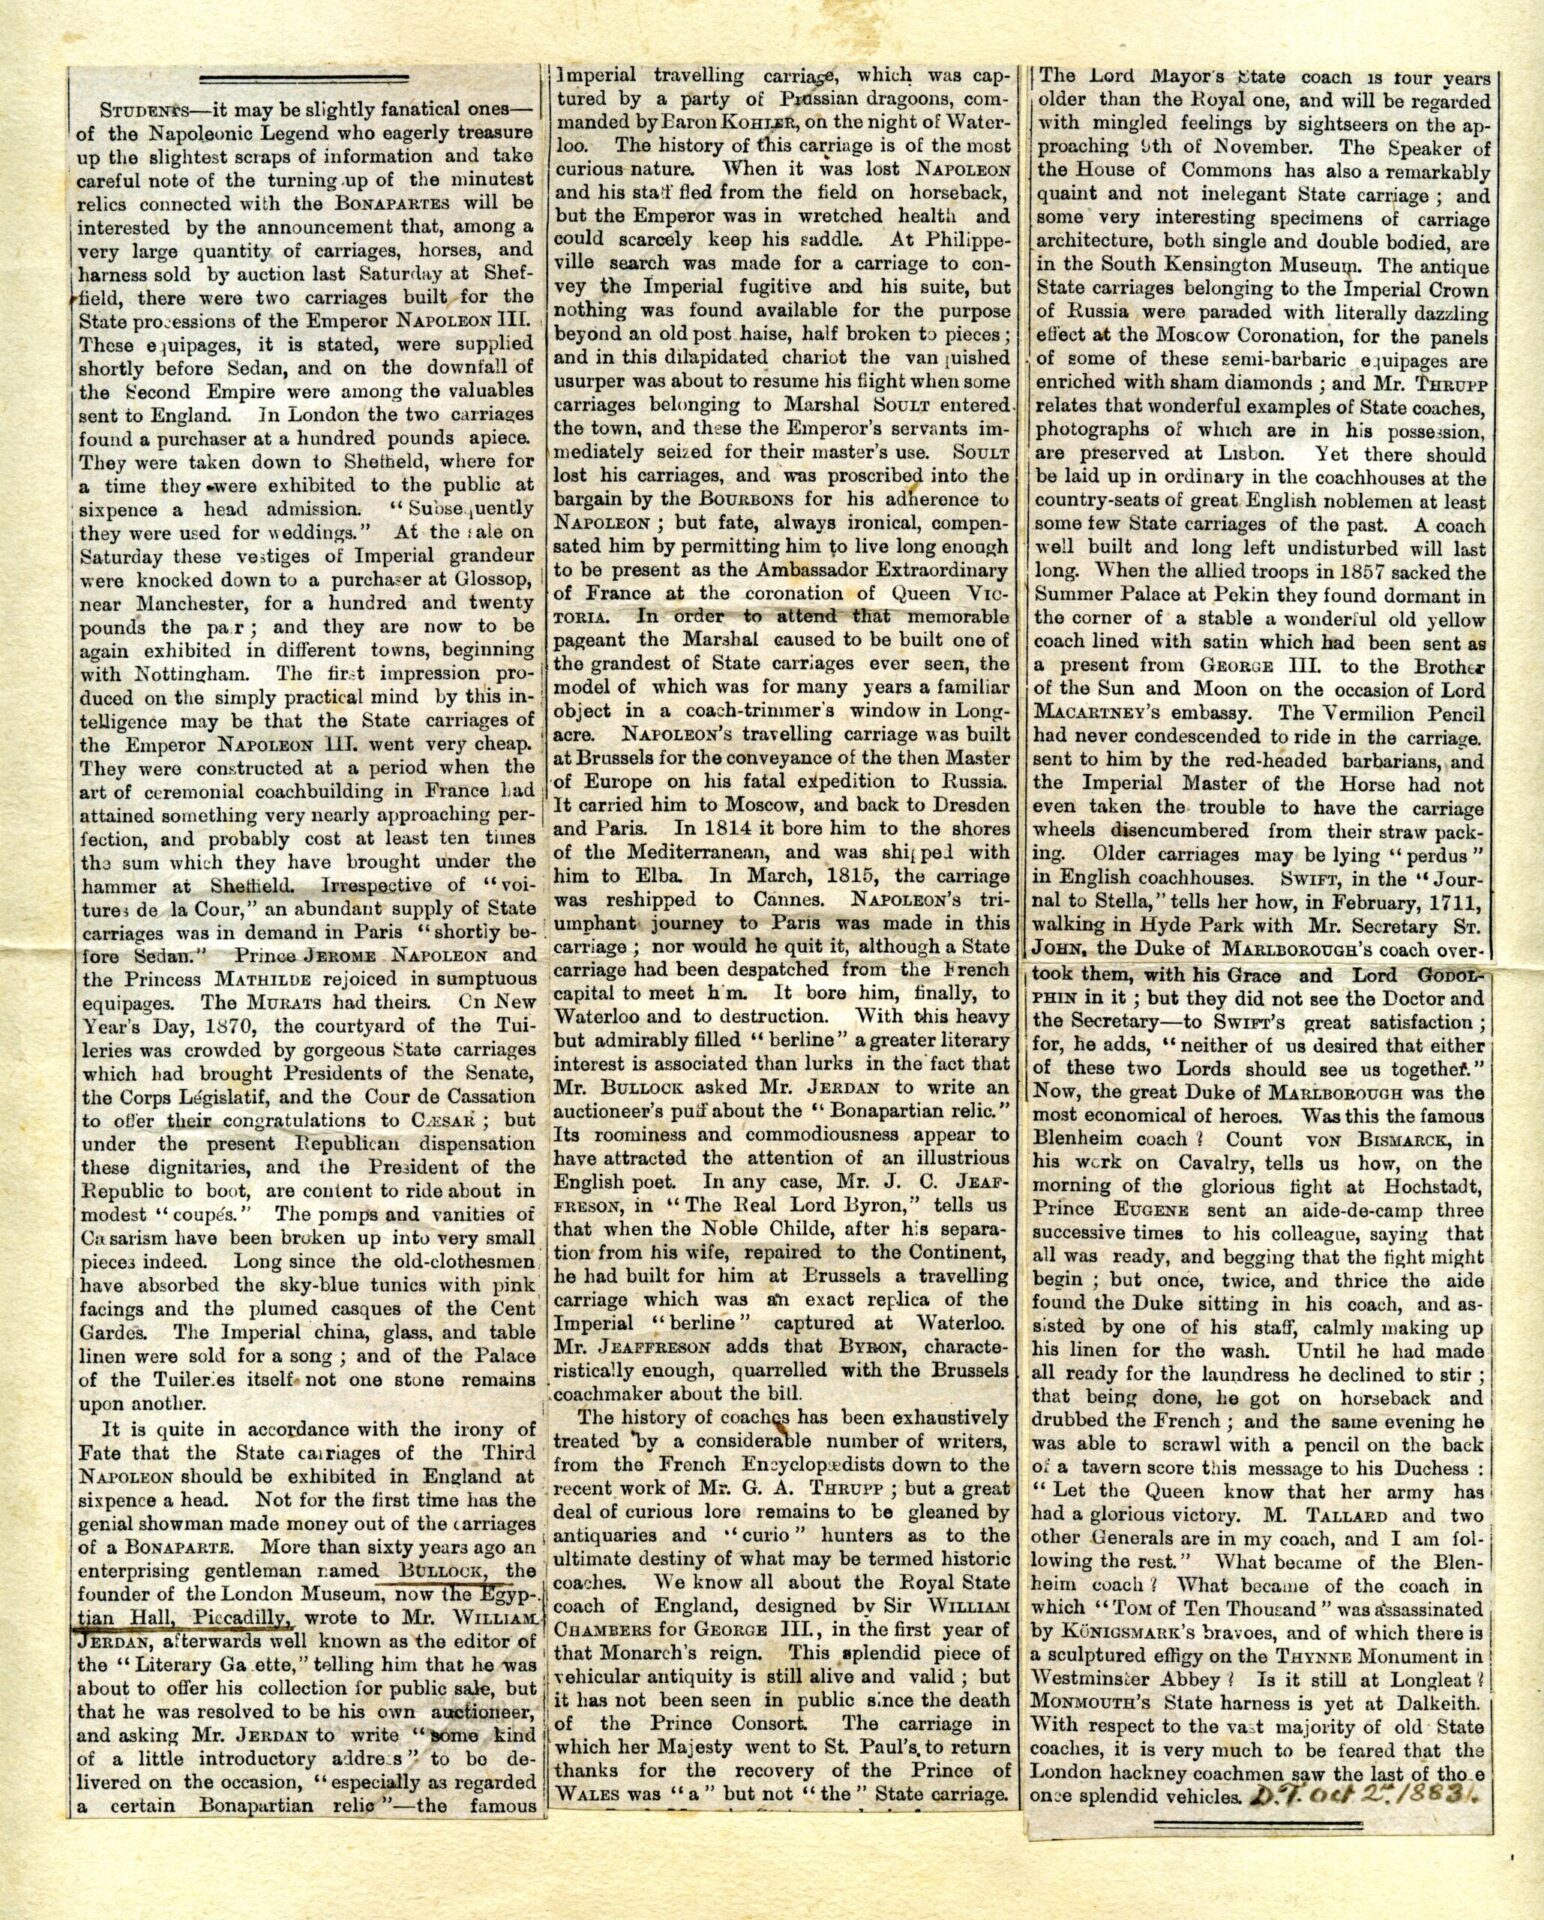 Newspaper article about state coaches mentioning the Egyptian Hall and Napoleon’s coach